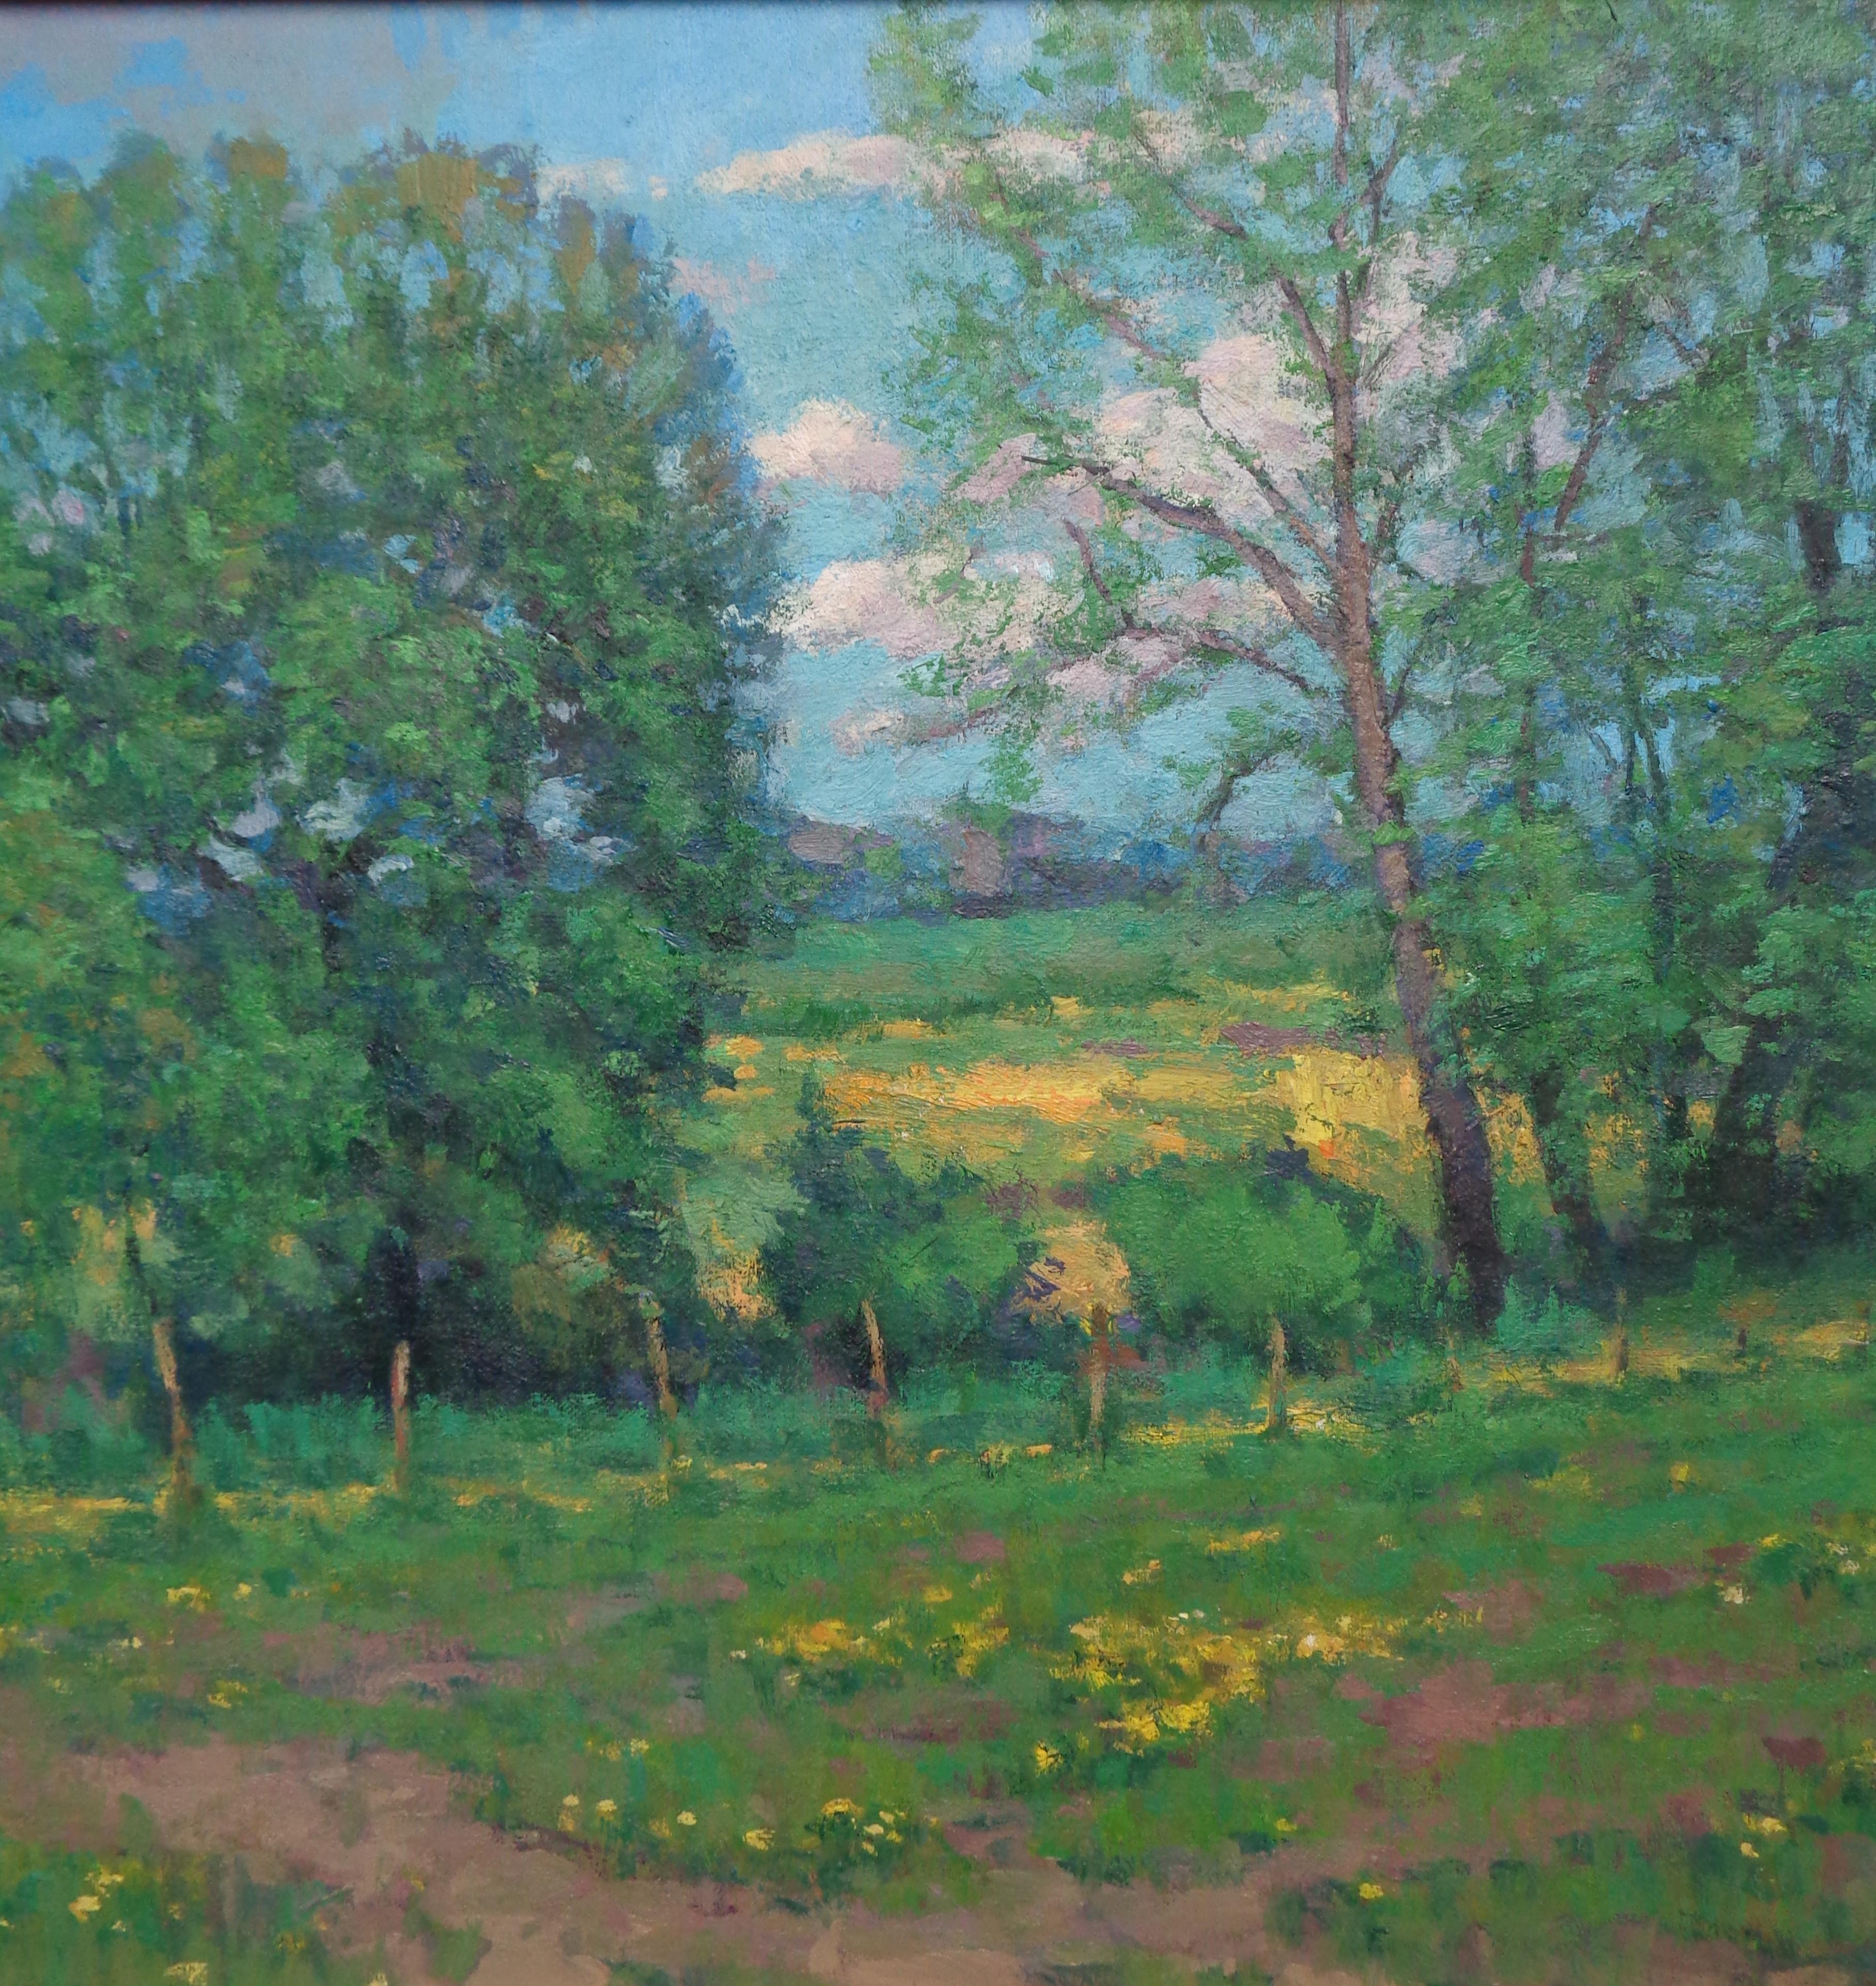  Impressionistic Farm Landscape Oil Painting Michael Budden Glorious Spring For Sale 2